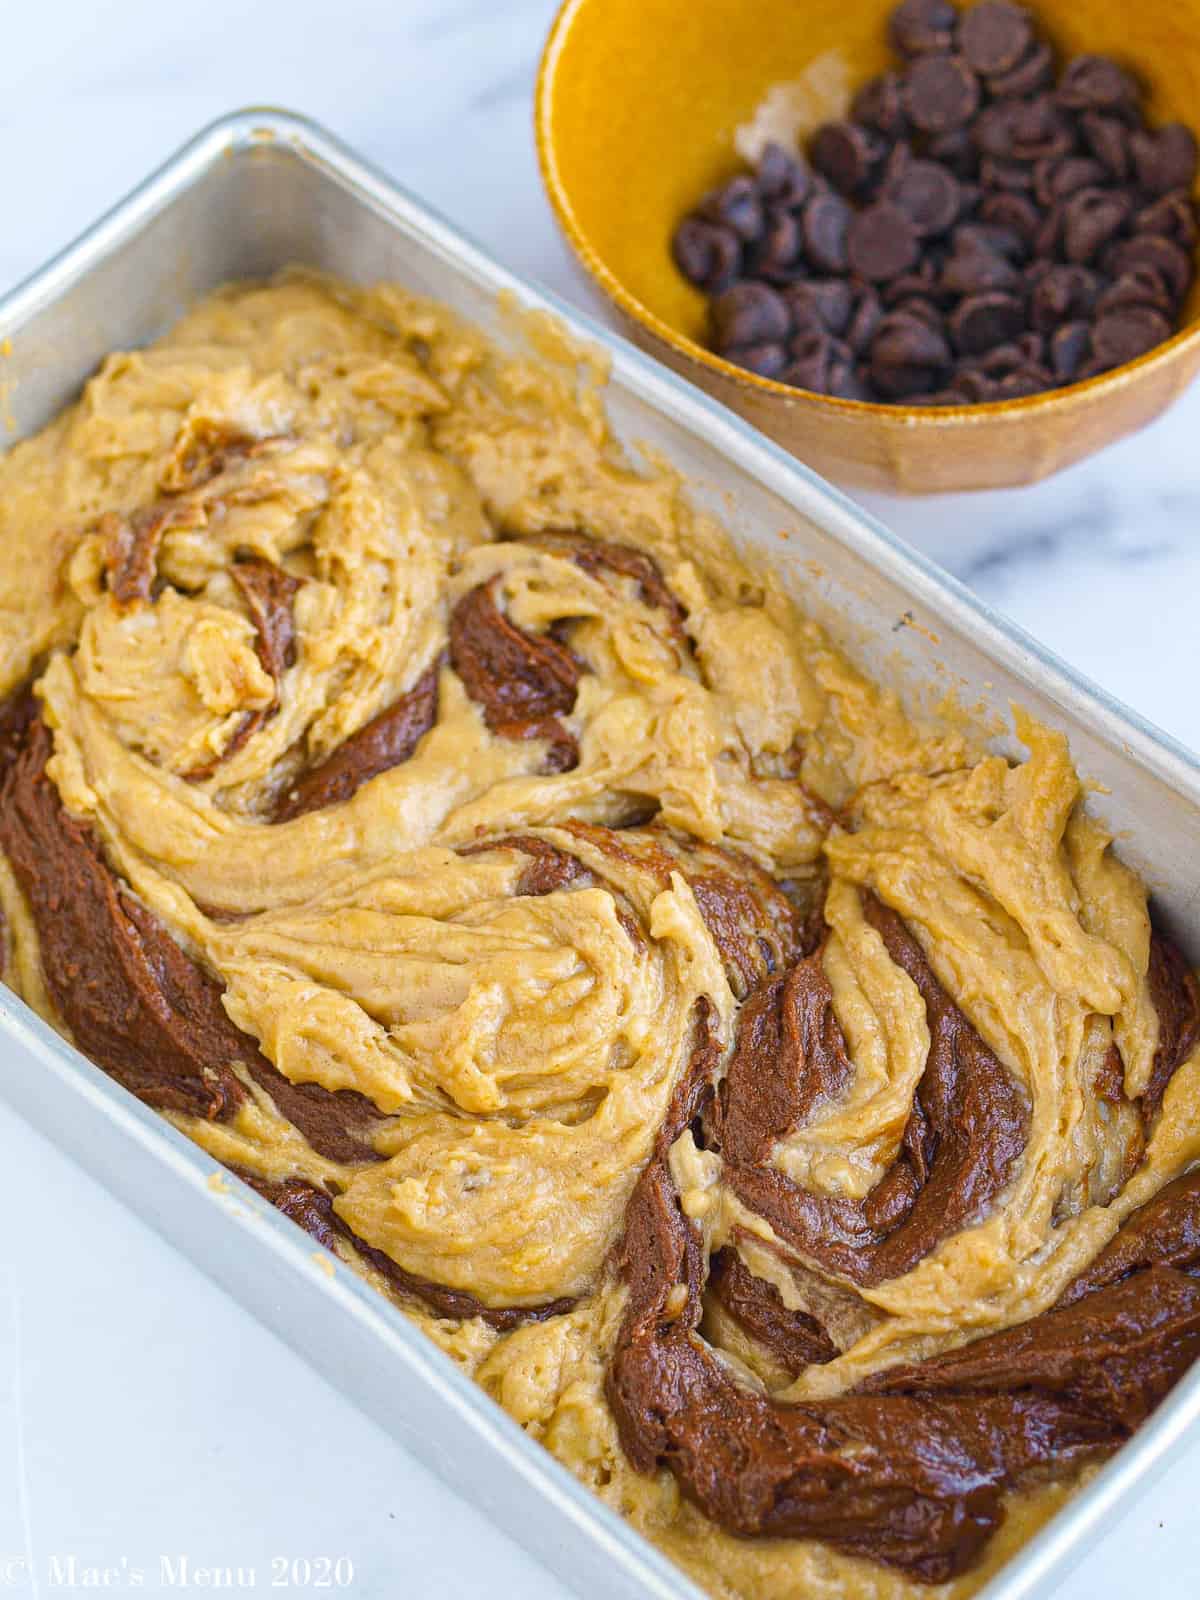 Swirling the peanut butter and chocolate peanut butter banana batter together in a loaf pan